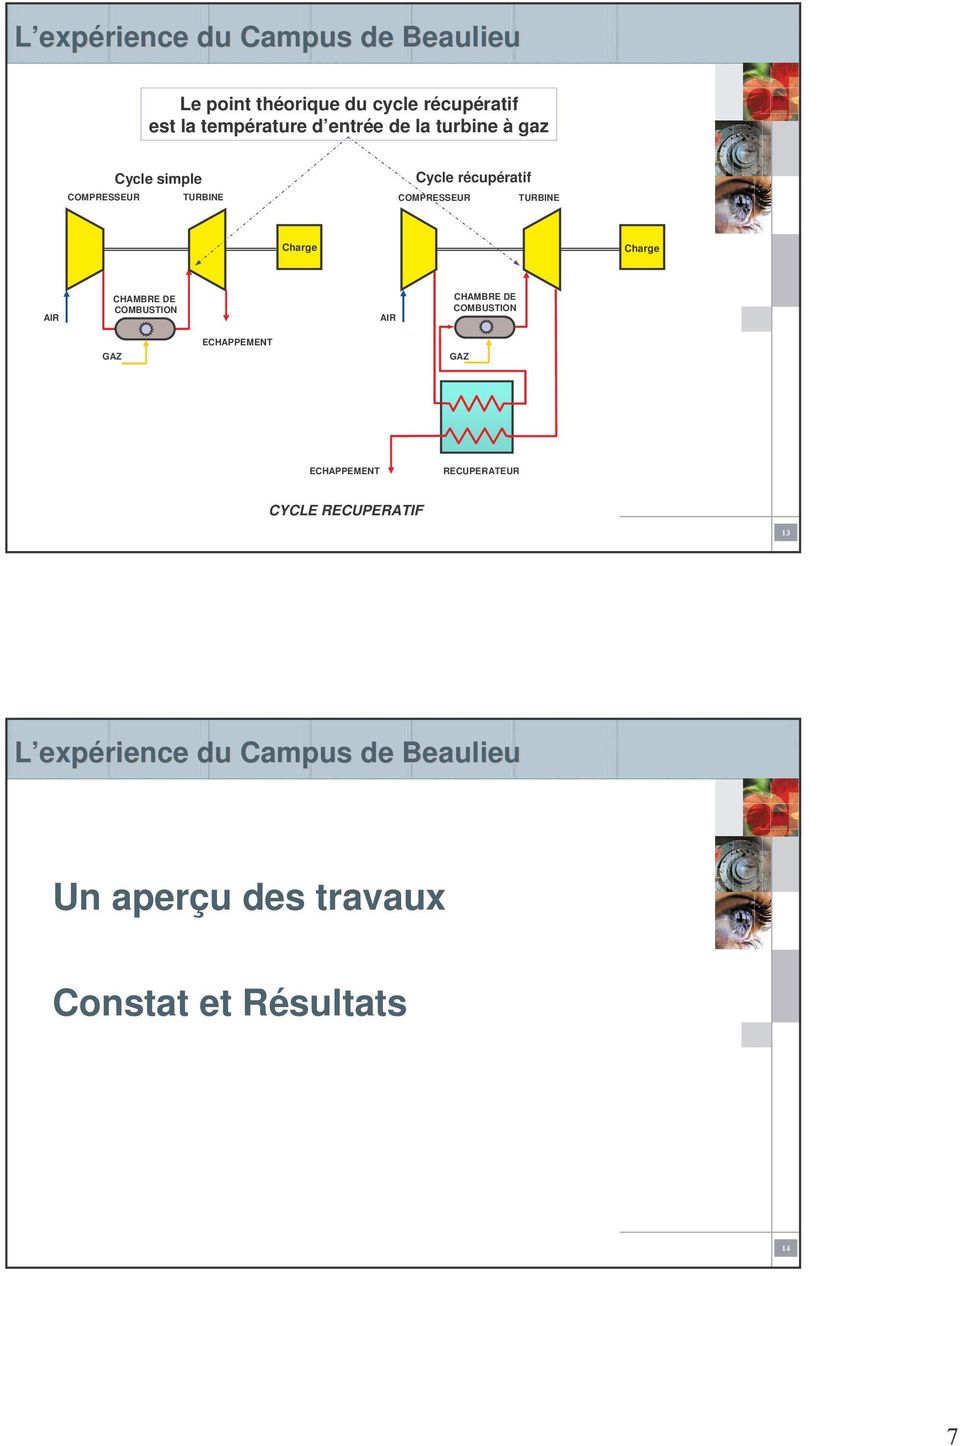 Charge Charge AIR CHAMBRE DE COMBUSTION AIR CHAMBRE DE COMBUSTION GAZ ECHAPPEMENT